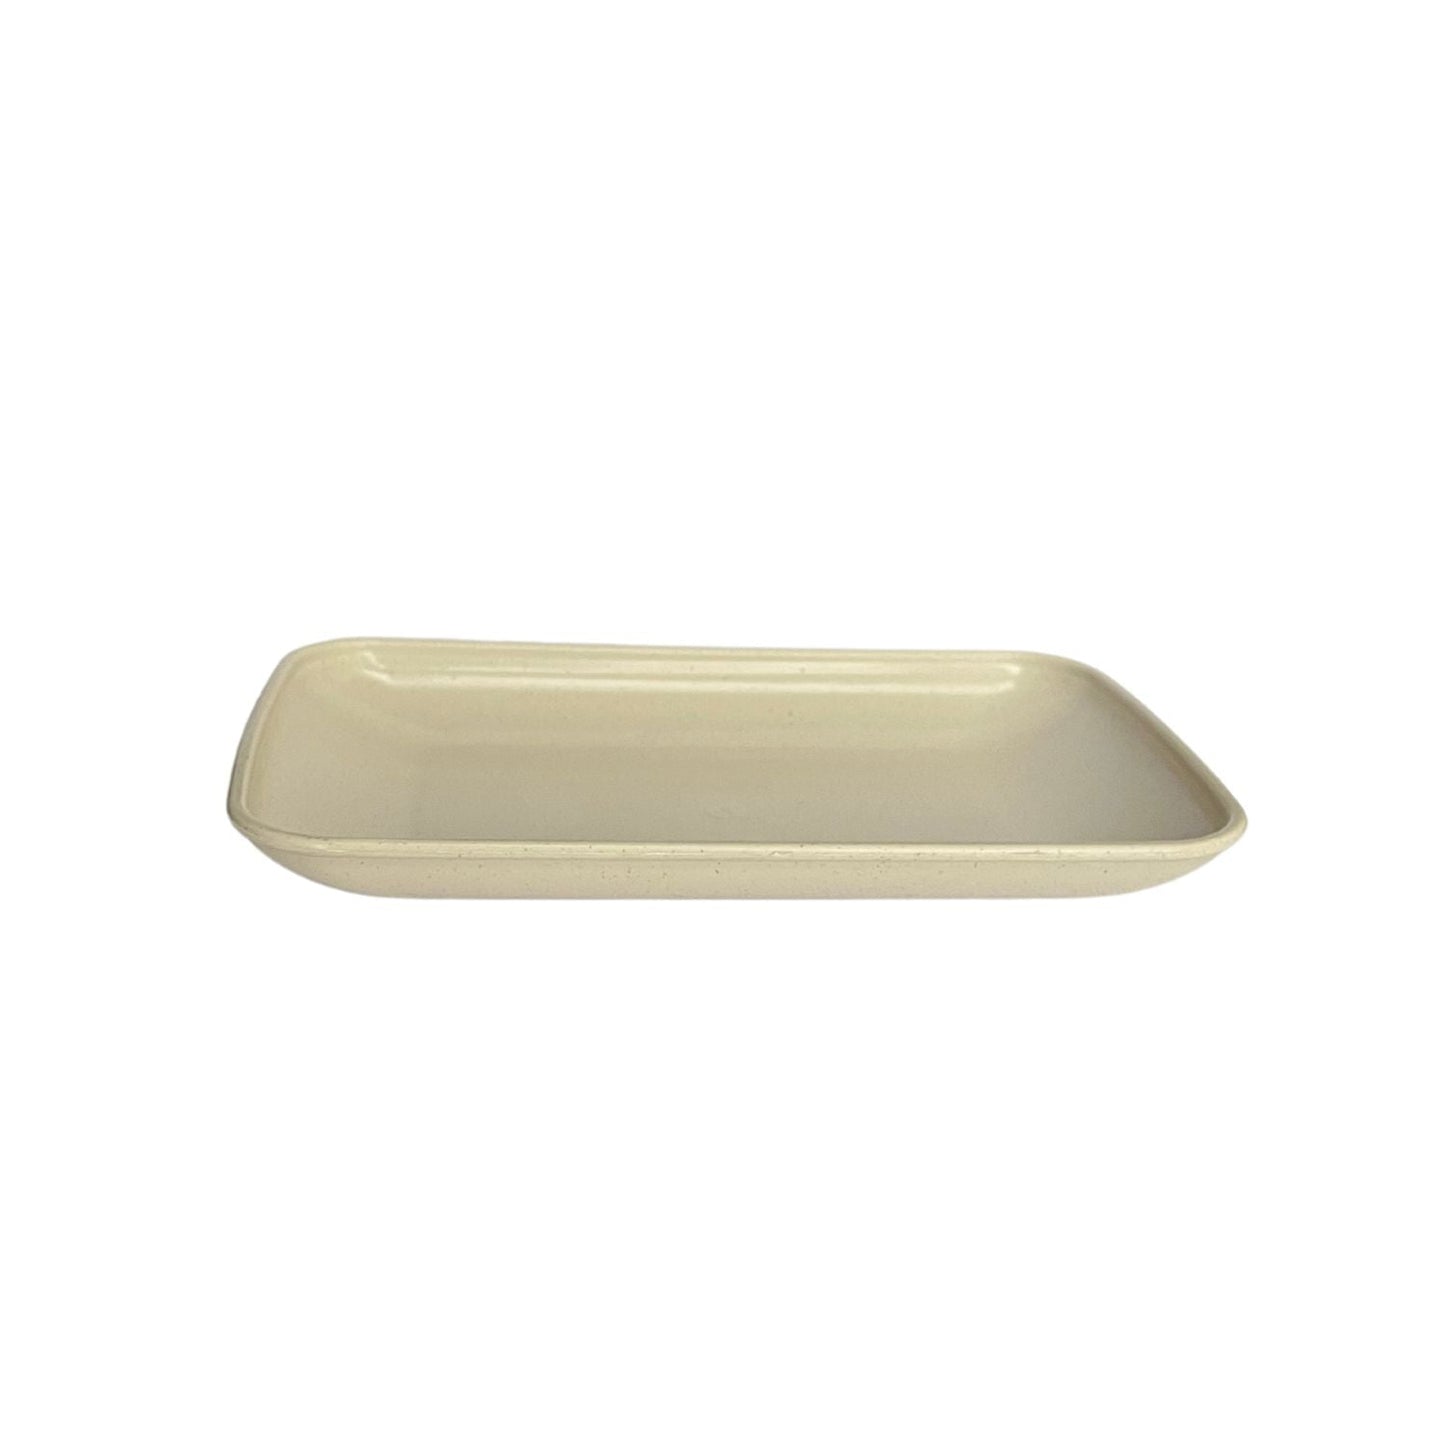 Wheat Straw Side Plate Set of 1